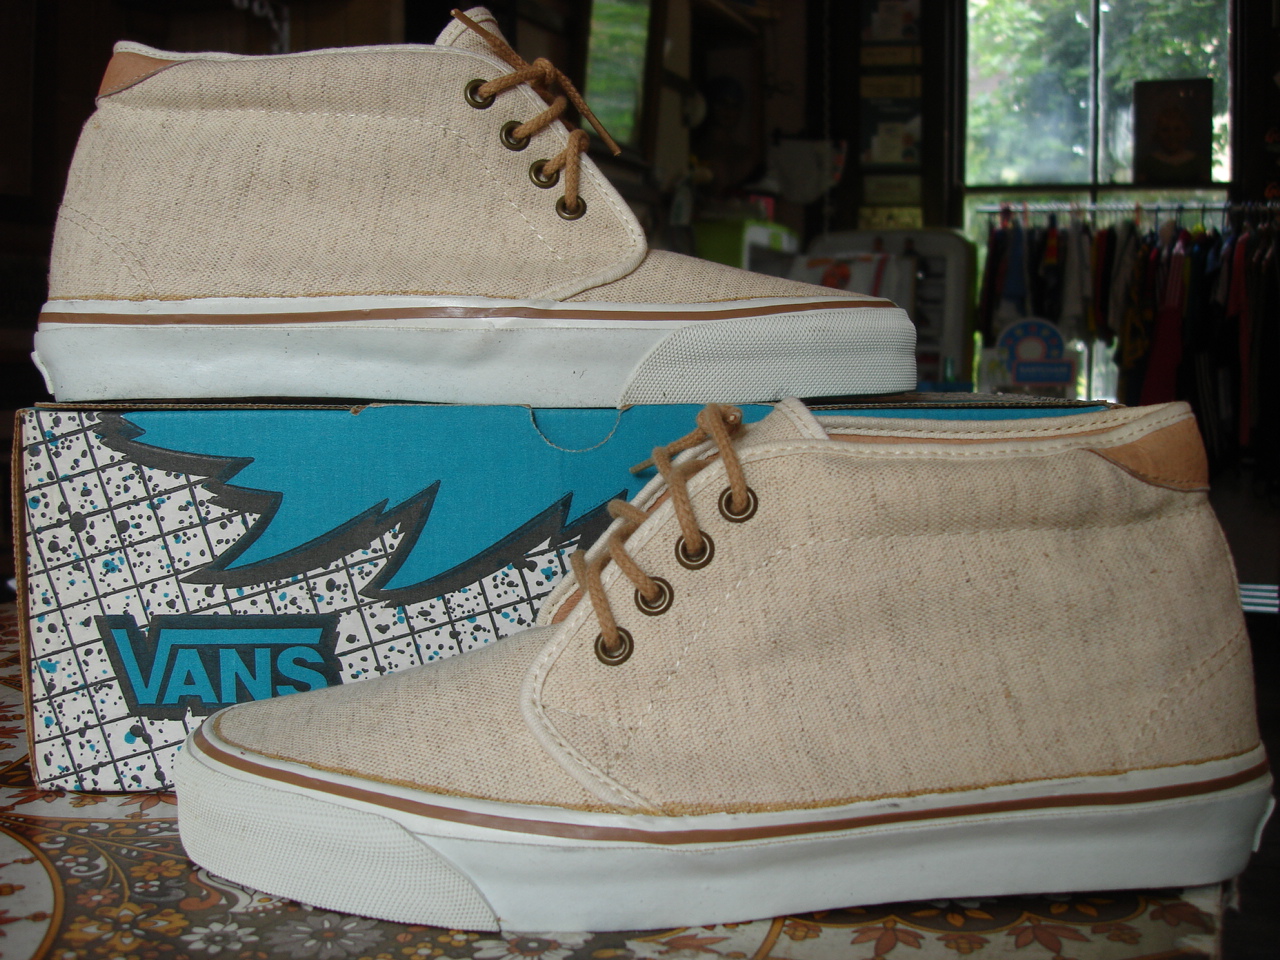 theothersideofthepillow: vintage VANS natural linen chukka boot US10.5 style #69 tan foxing leather accents MADE IN USA